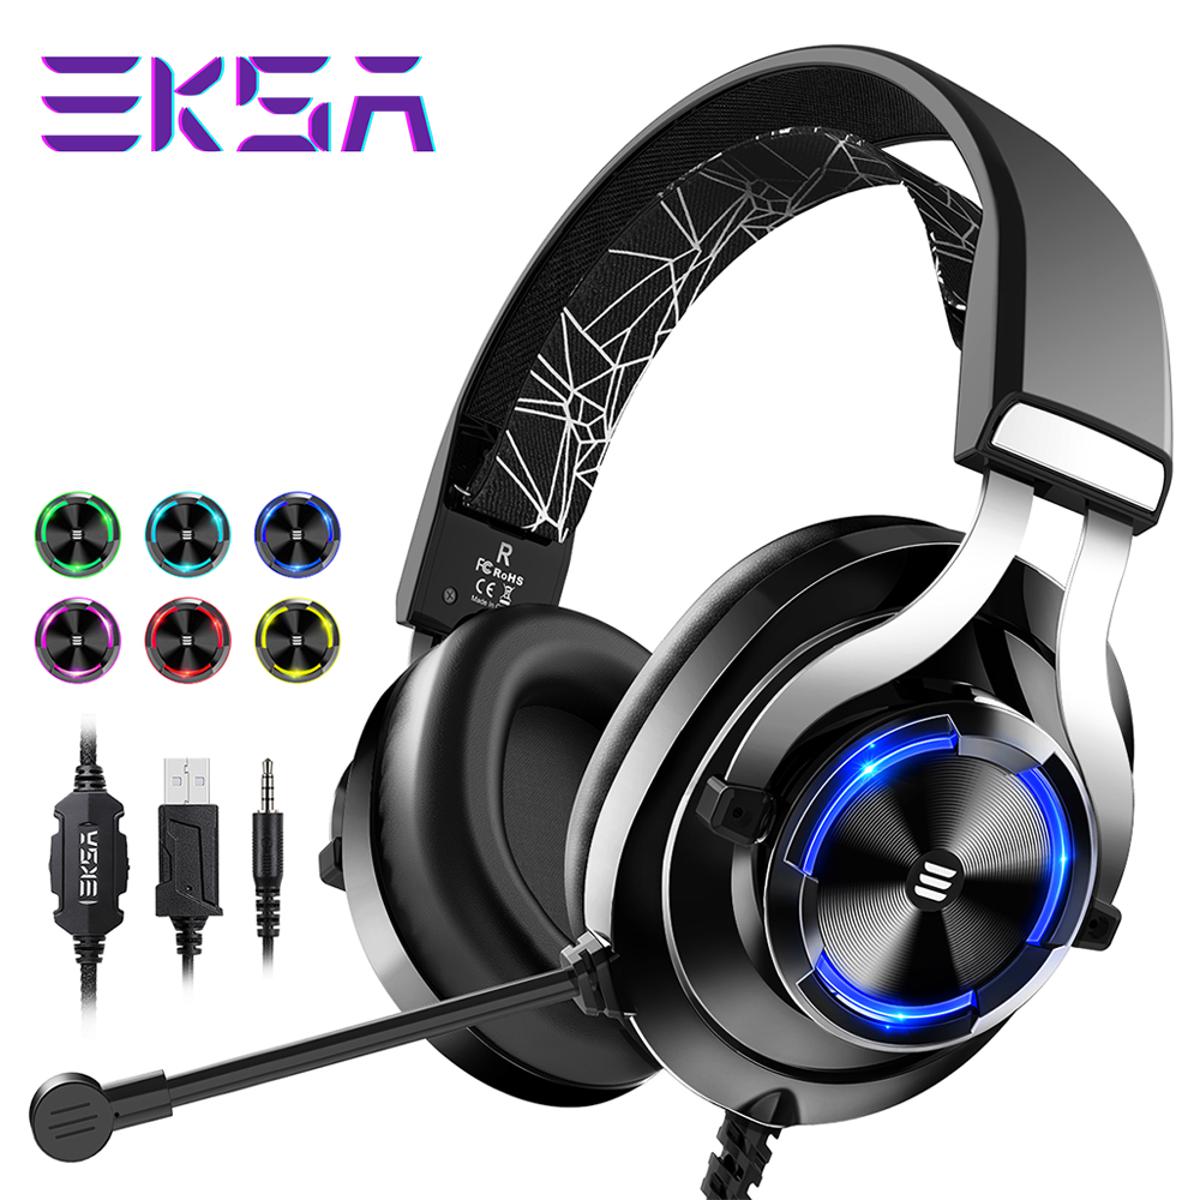 Gaming Headphones With Mic at Rs 5199